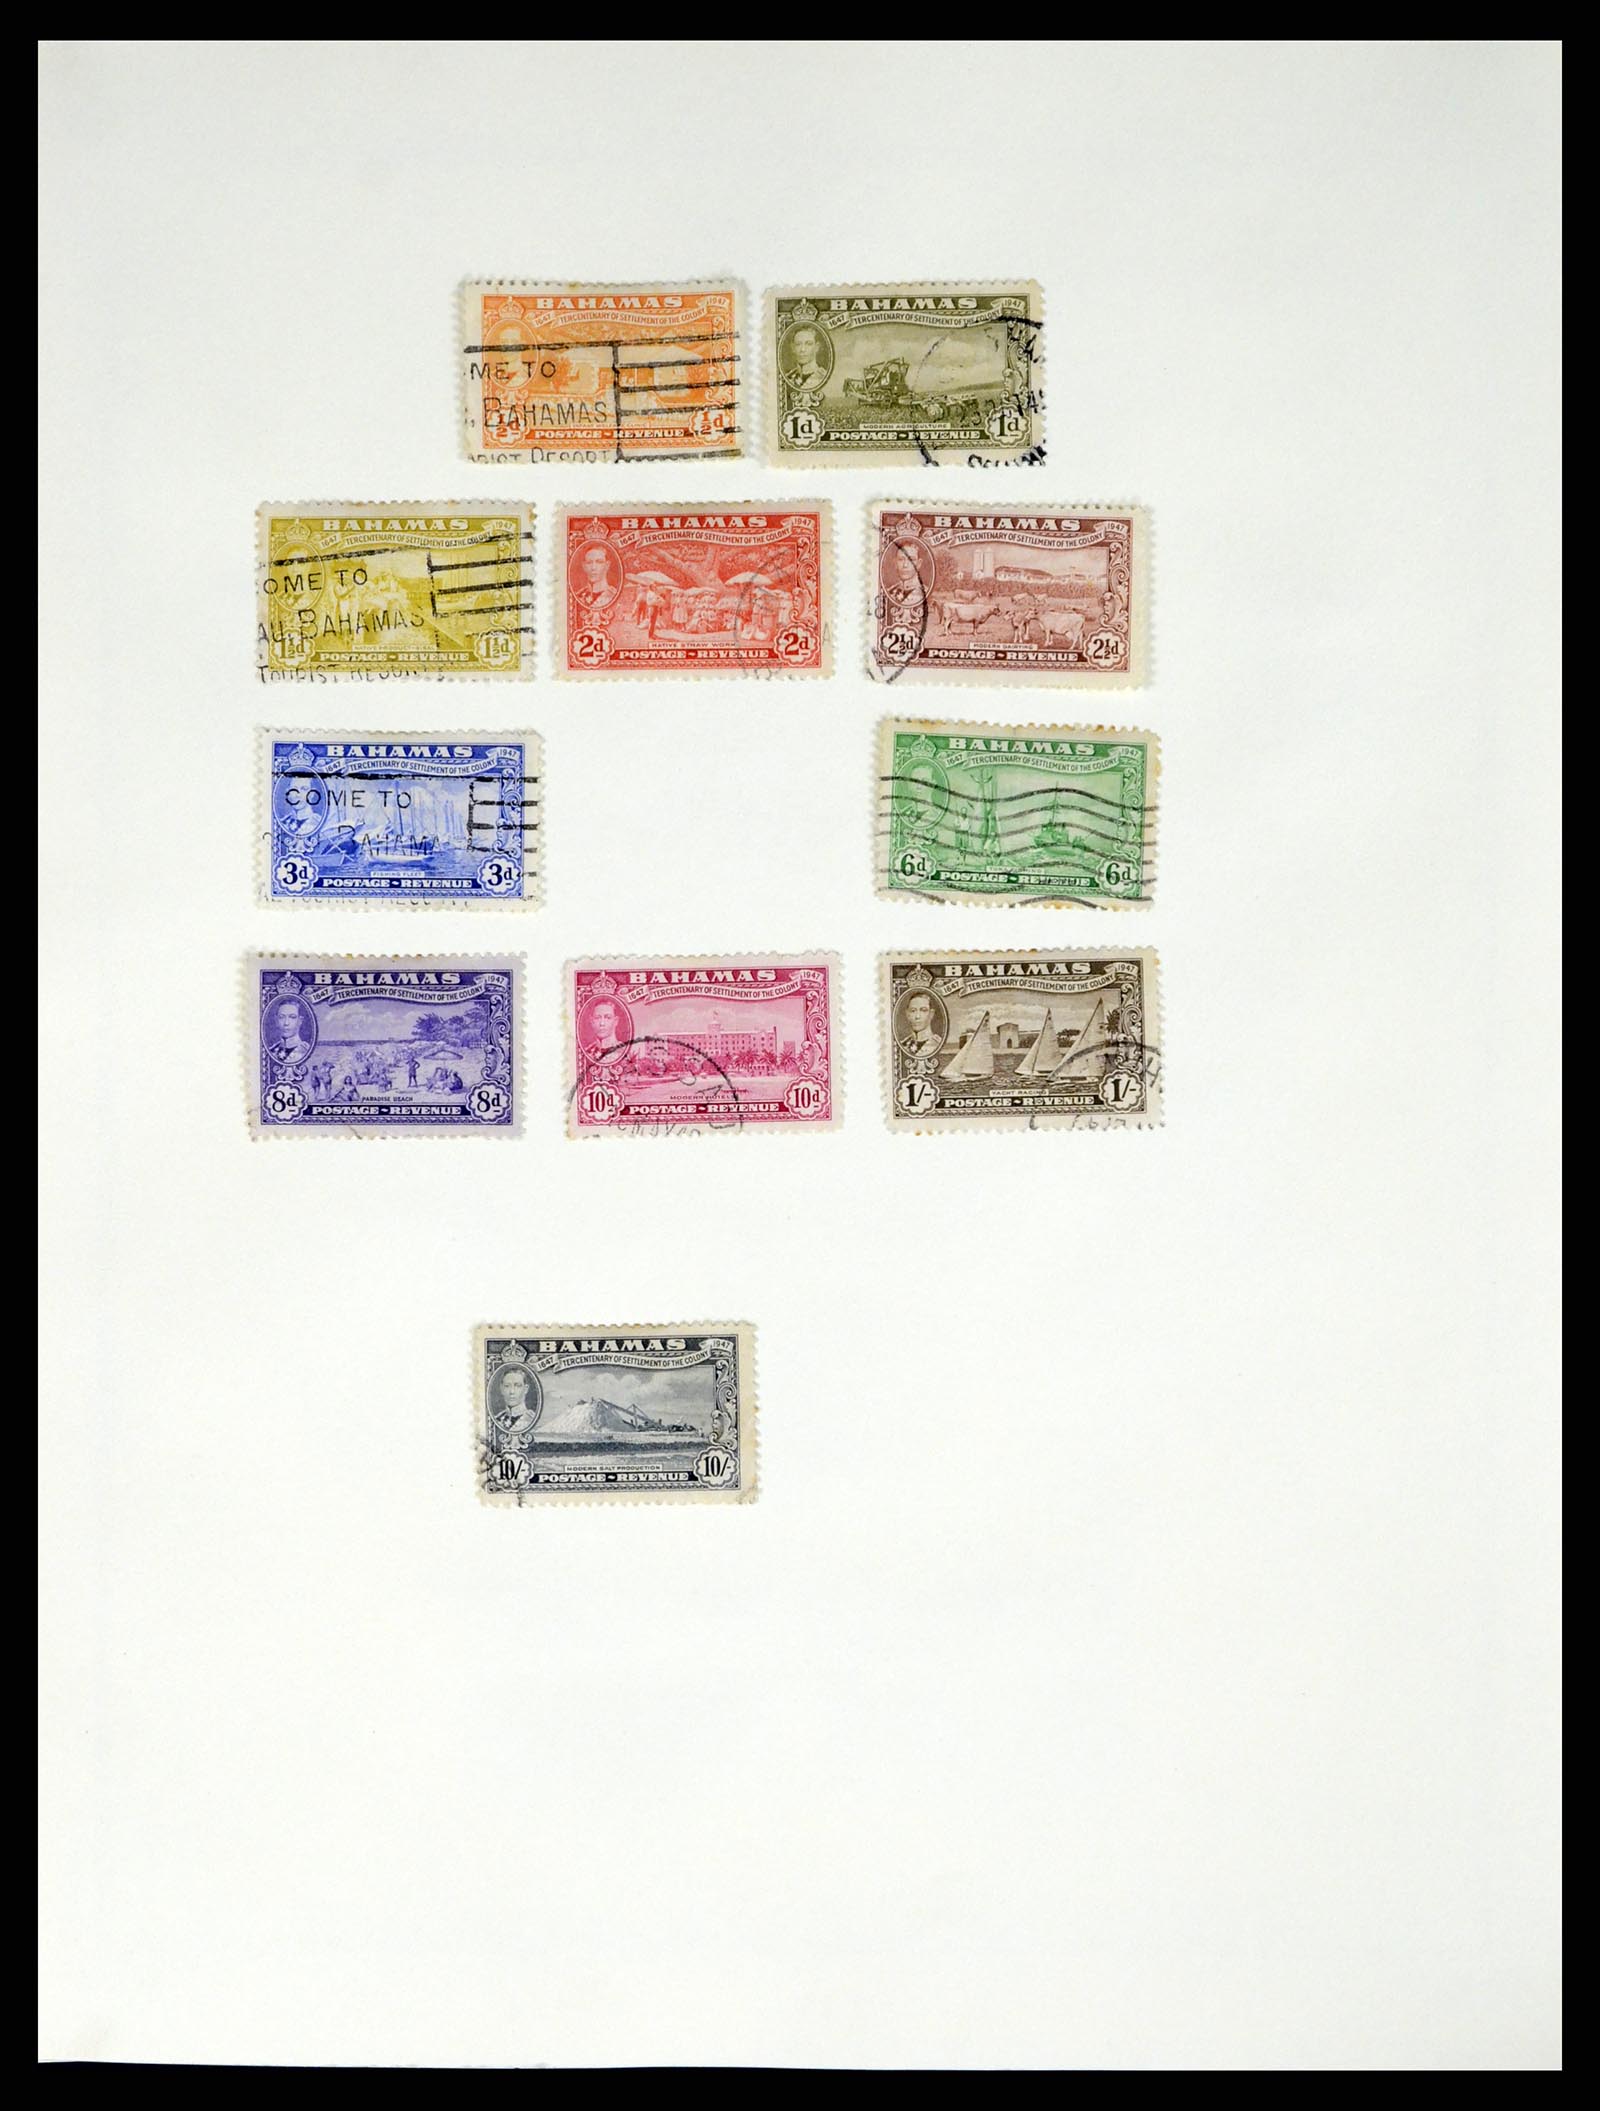 37629 014 - Stamp collection 37629 Bahamas 1861-2013.